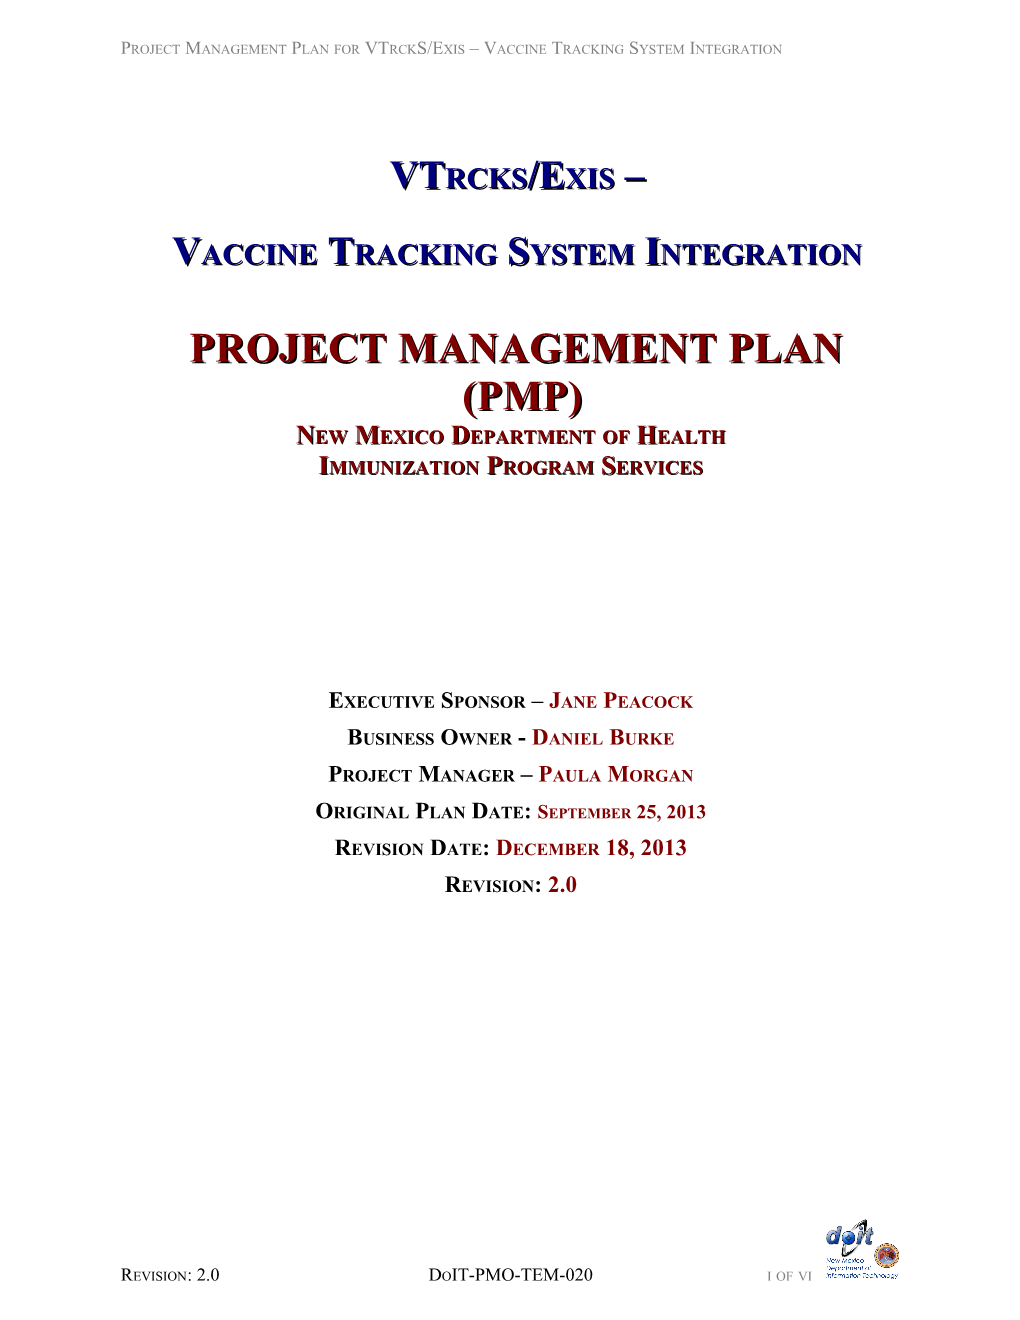 Project Management Plan for Vtrcks/Exis Vaccine Tracking System Integration